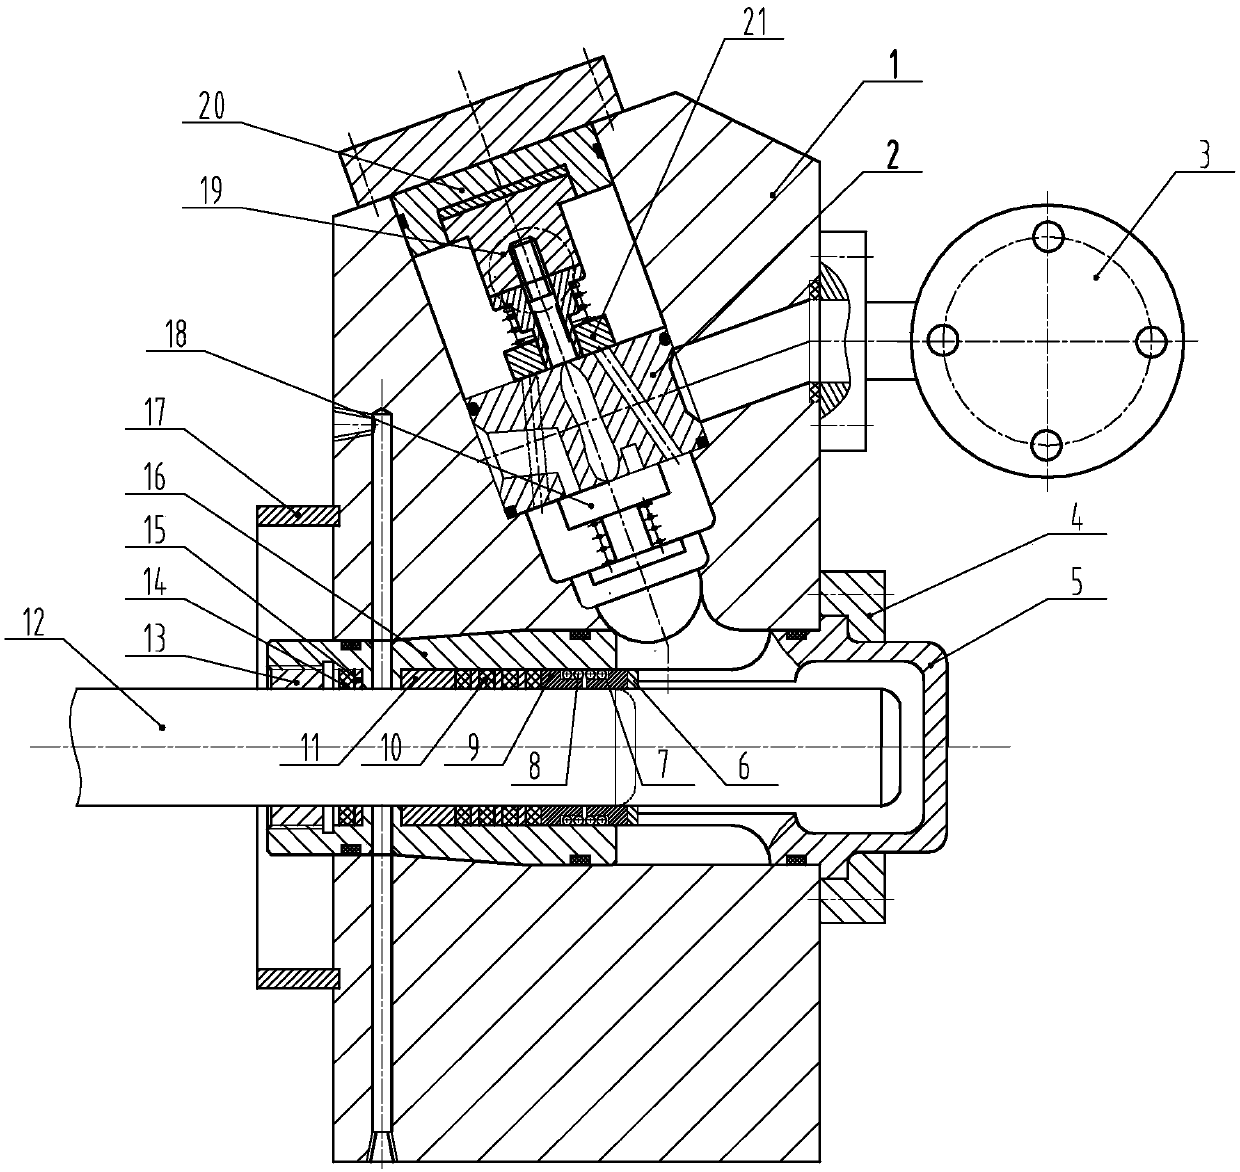 A hydraulic end assembly of a plunger pump with a conical surface positioning sealing box body